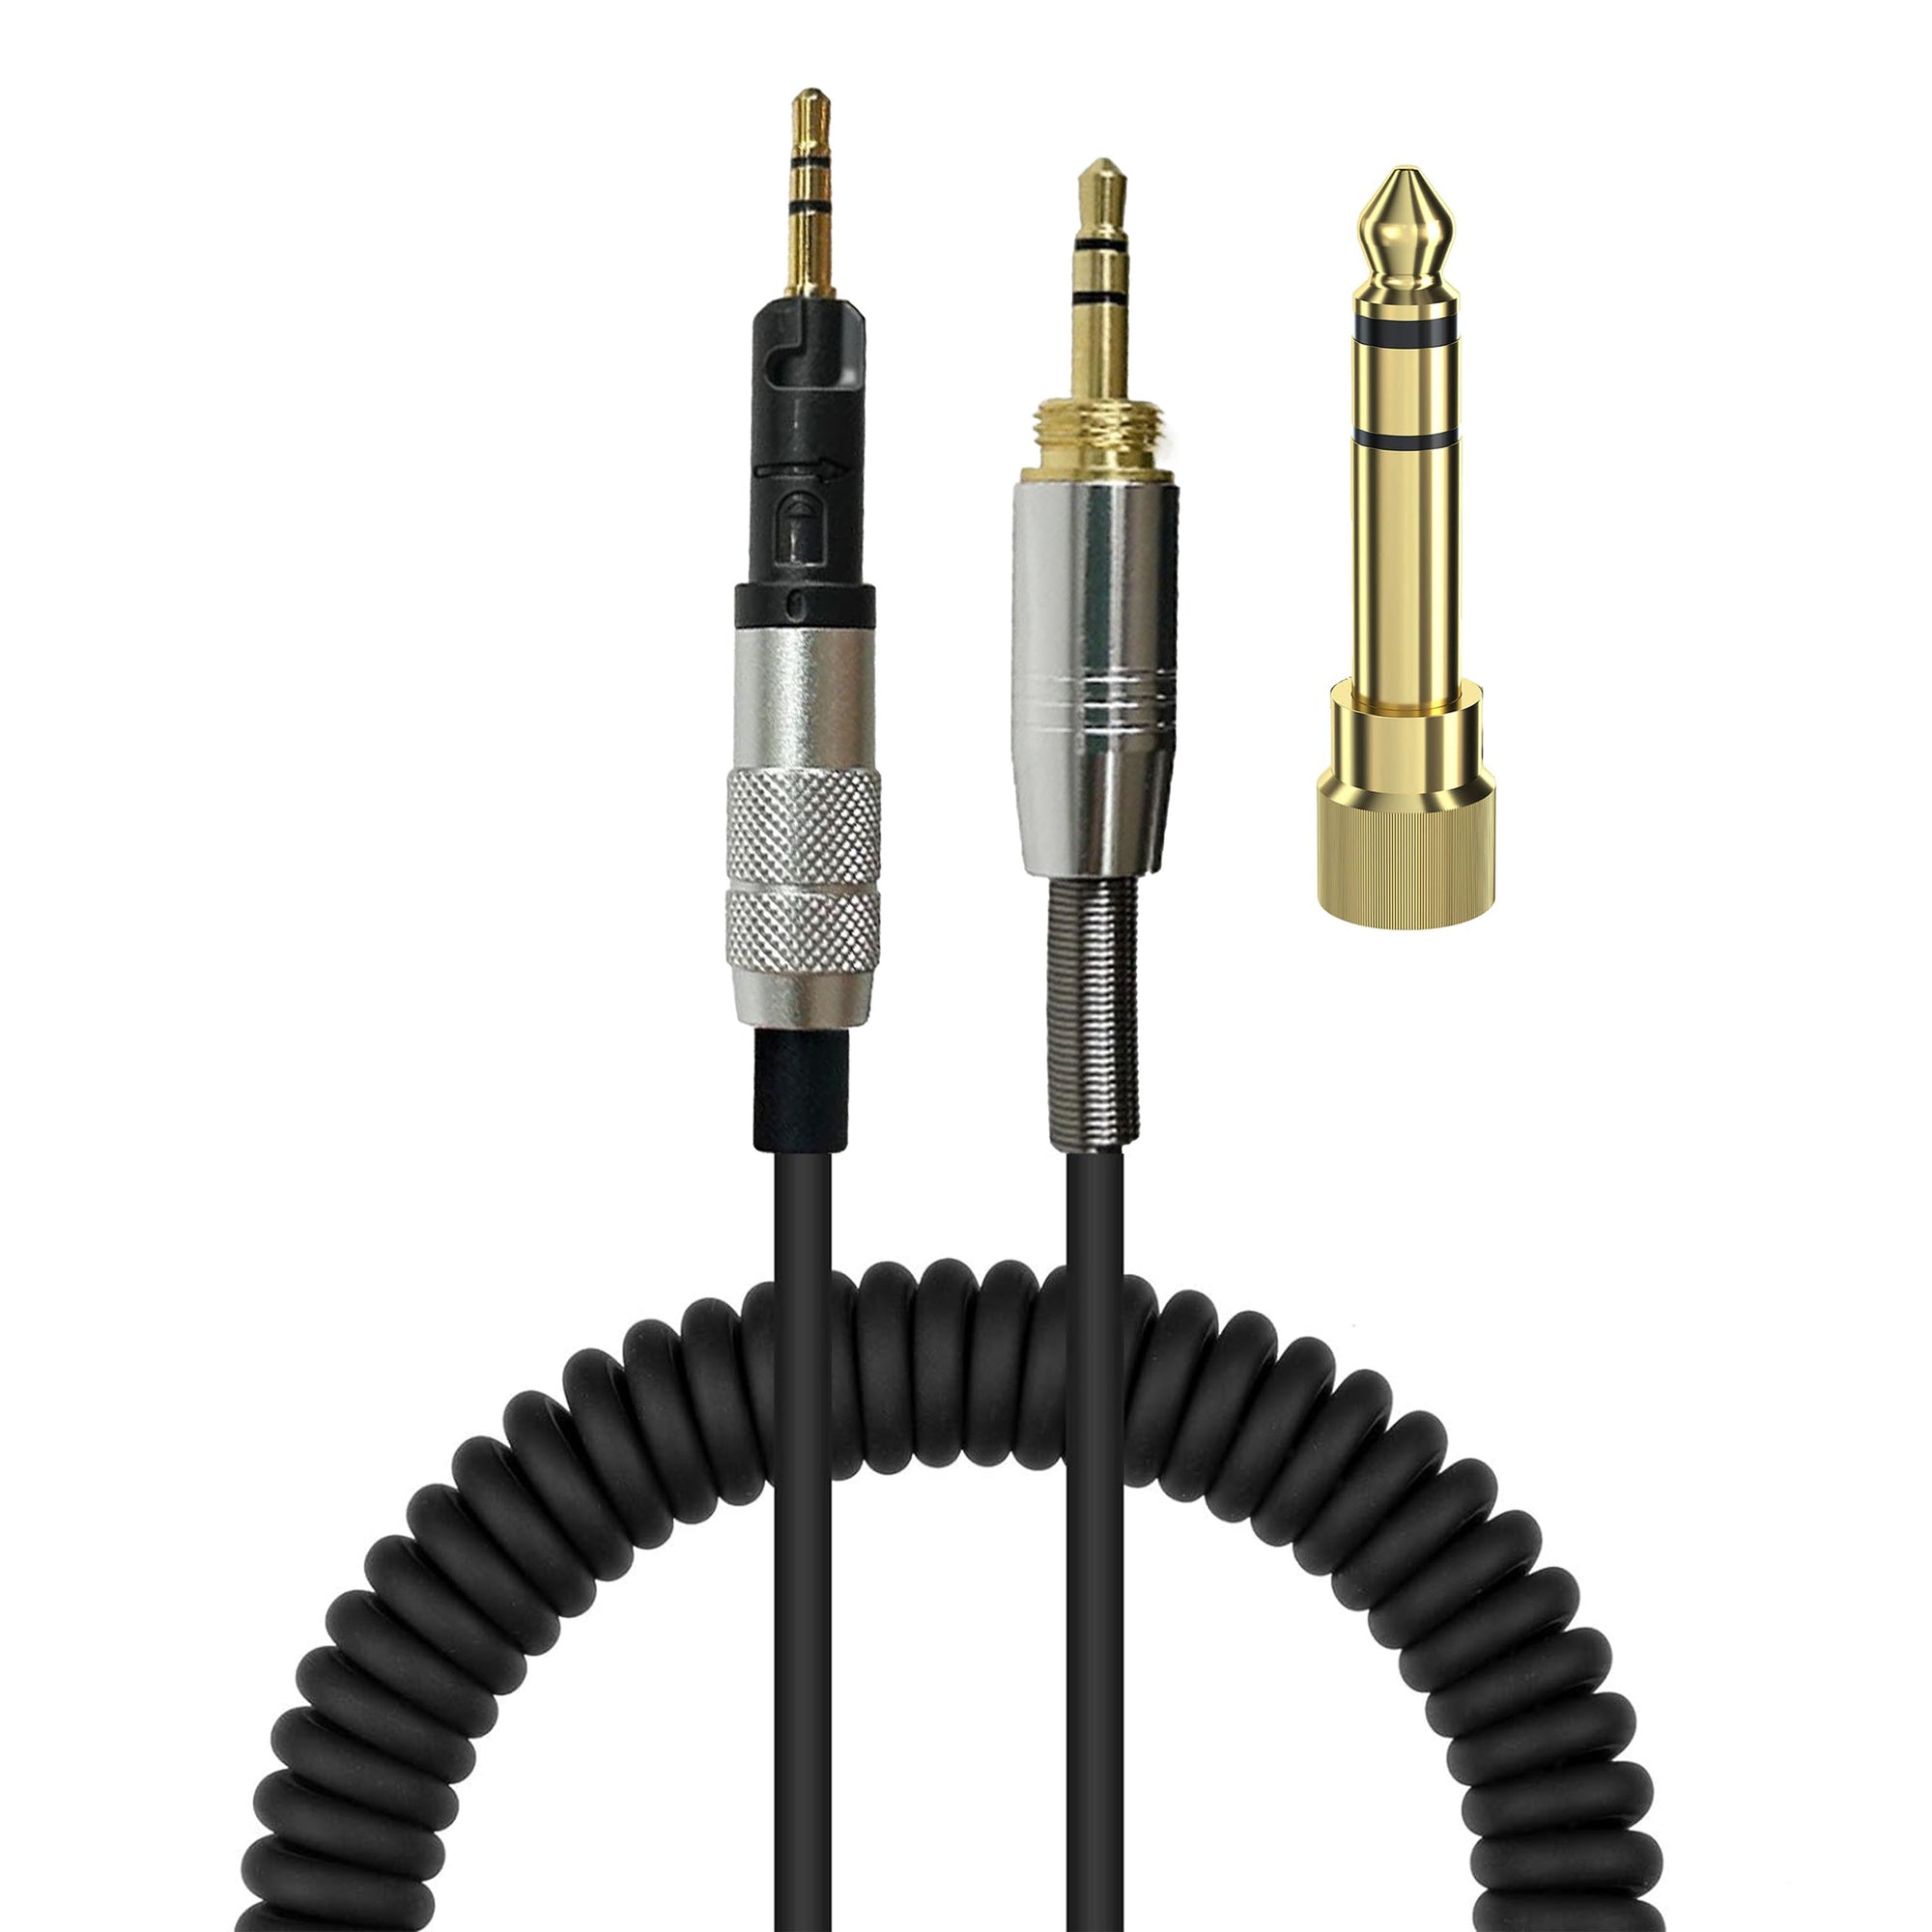 Replacement Coiled Cable for Audio Technica ATH-M50X, ATH-M40X & ATH-M70X Headphones, With ¼” (6.35mm) Audio Adapter - 5M / 16FT